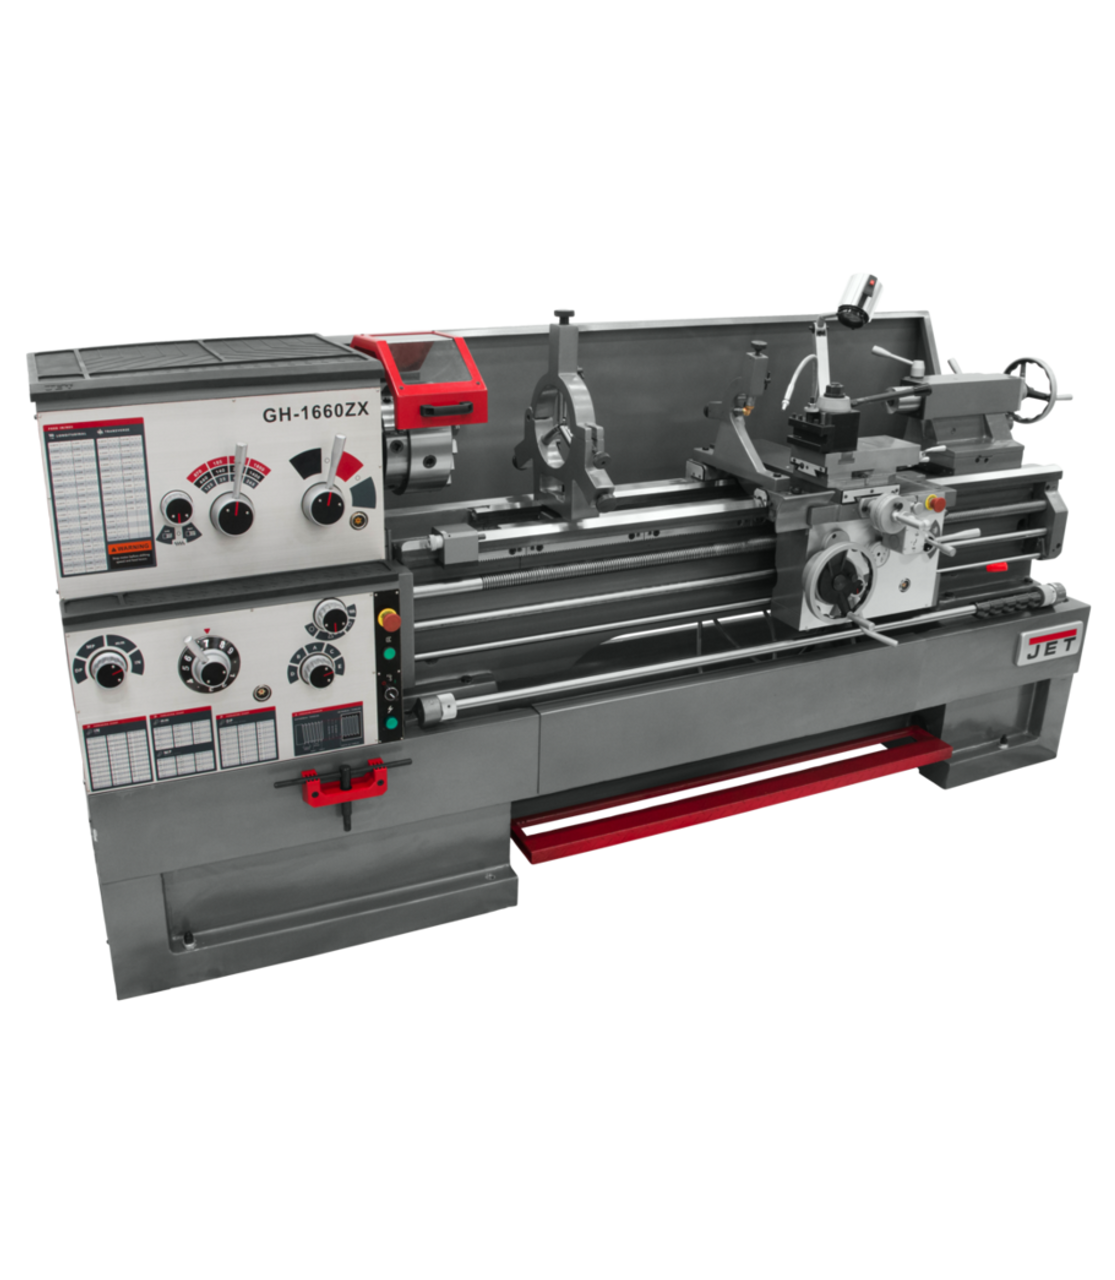 JET GH-1660ZX Large Spindle Bore Lathe 203 DRO 2X 460V